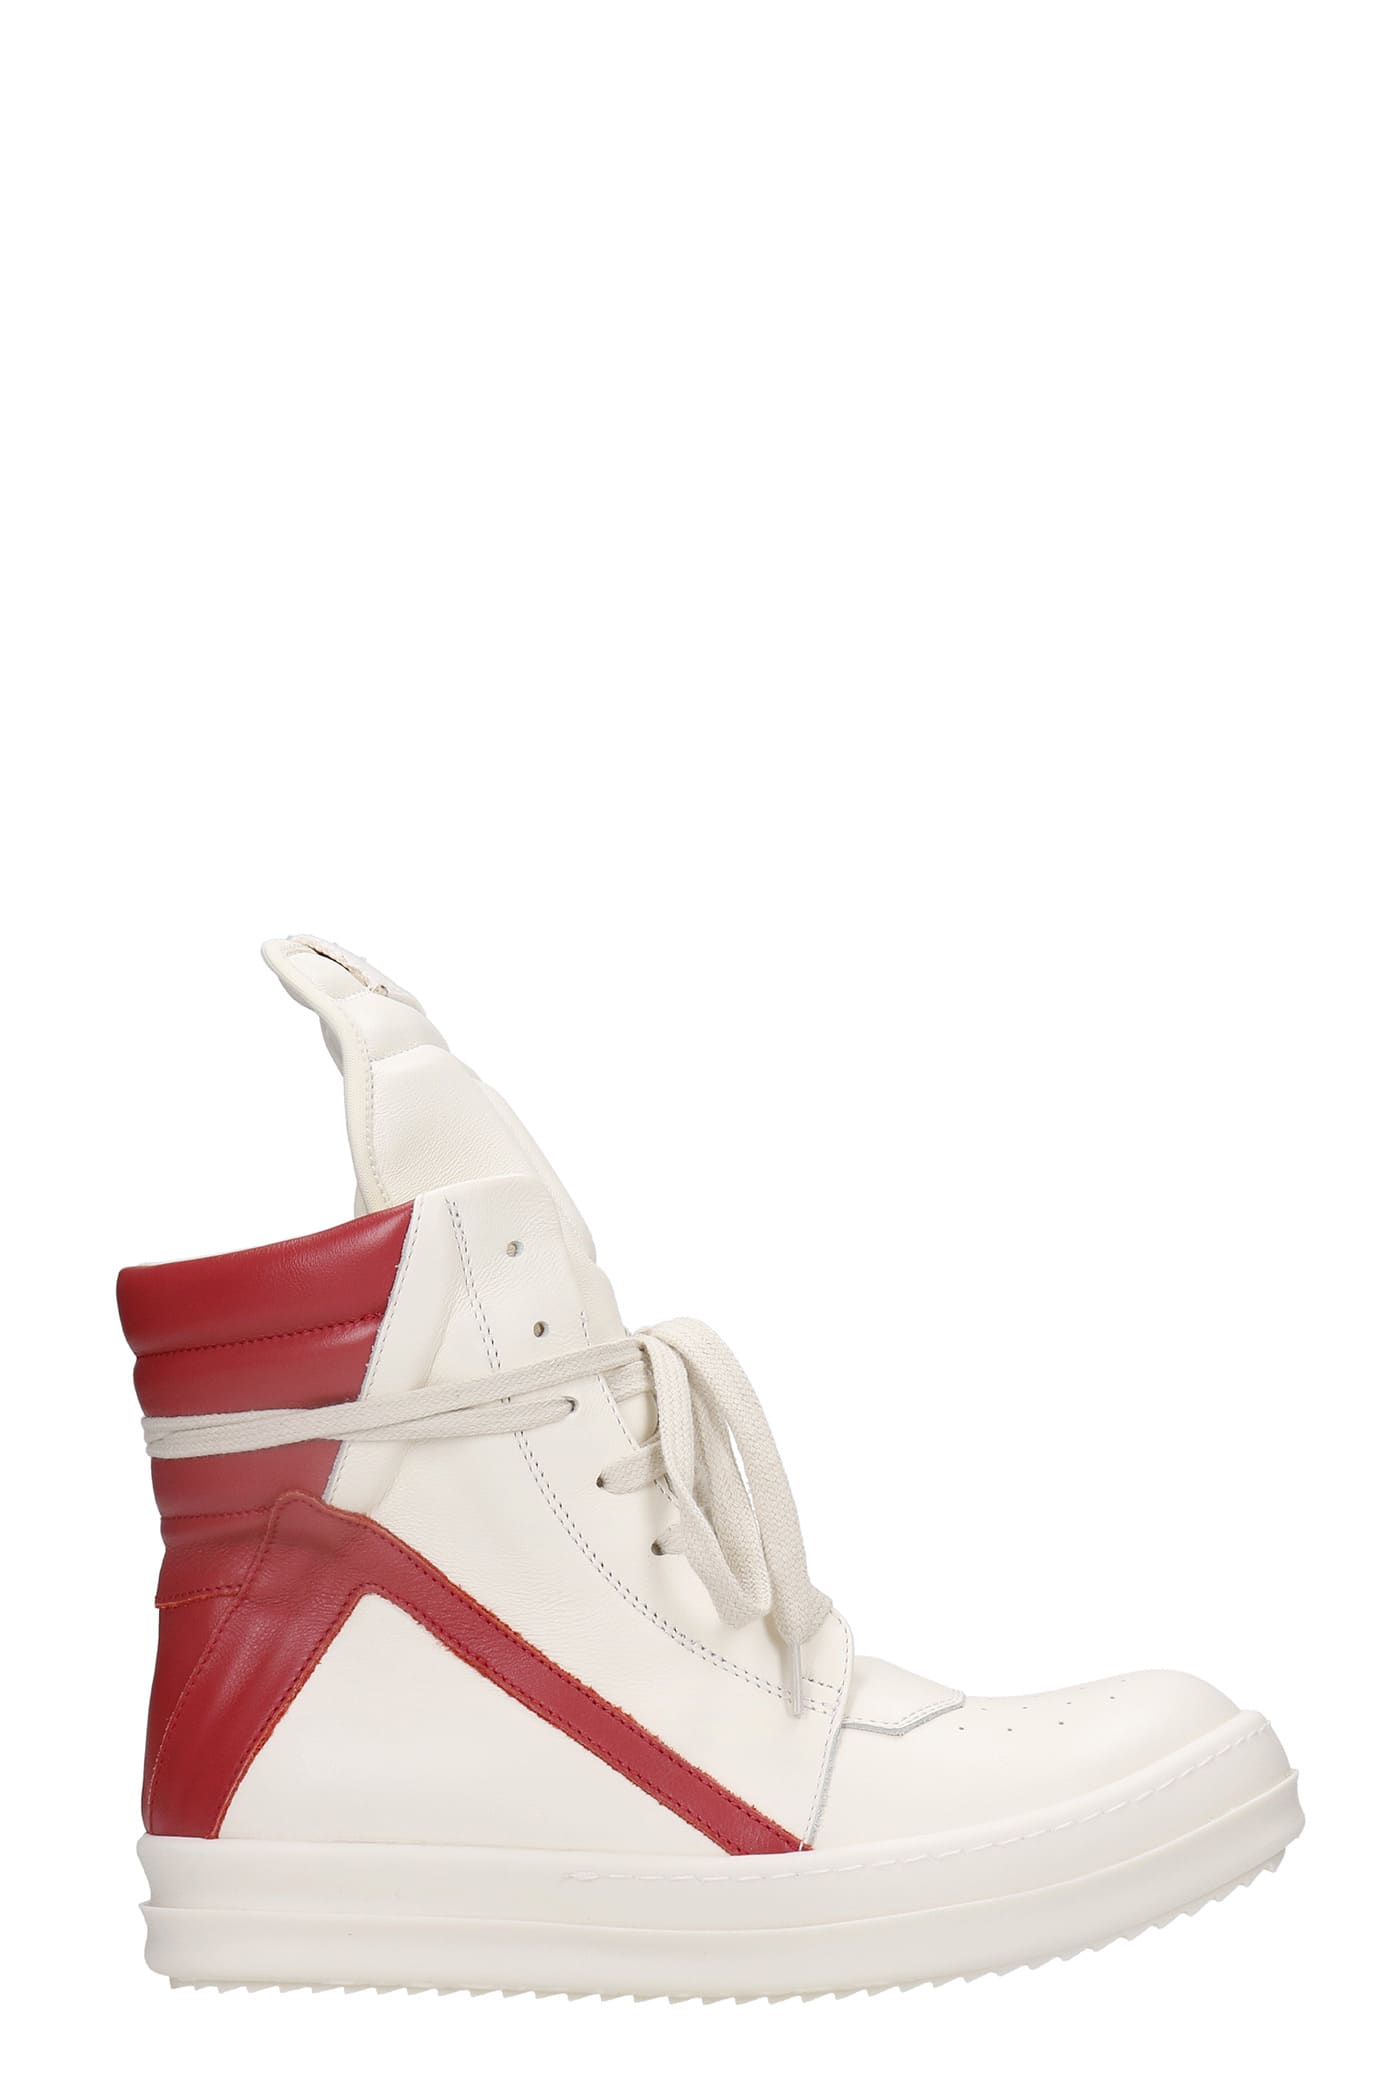 Rick Owens Geobasket Sneakers In White Leather